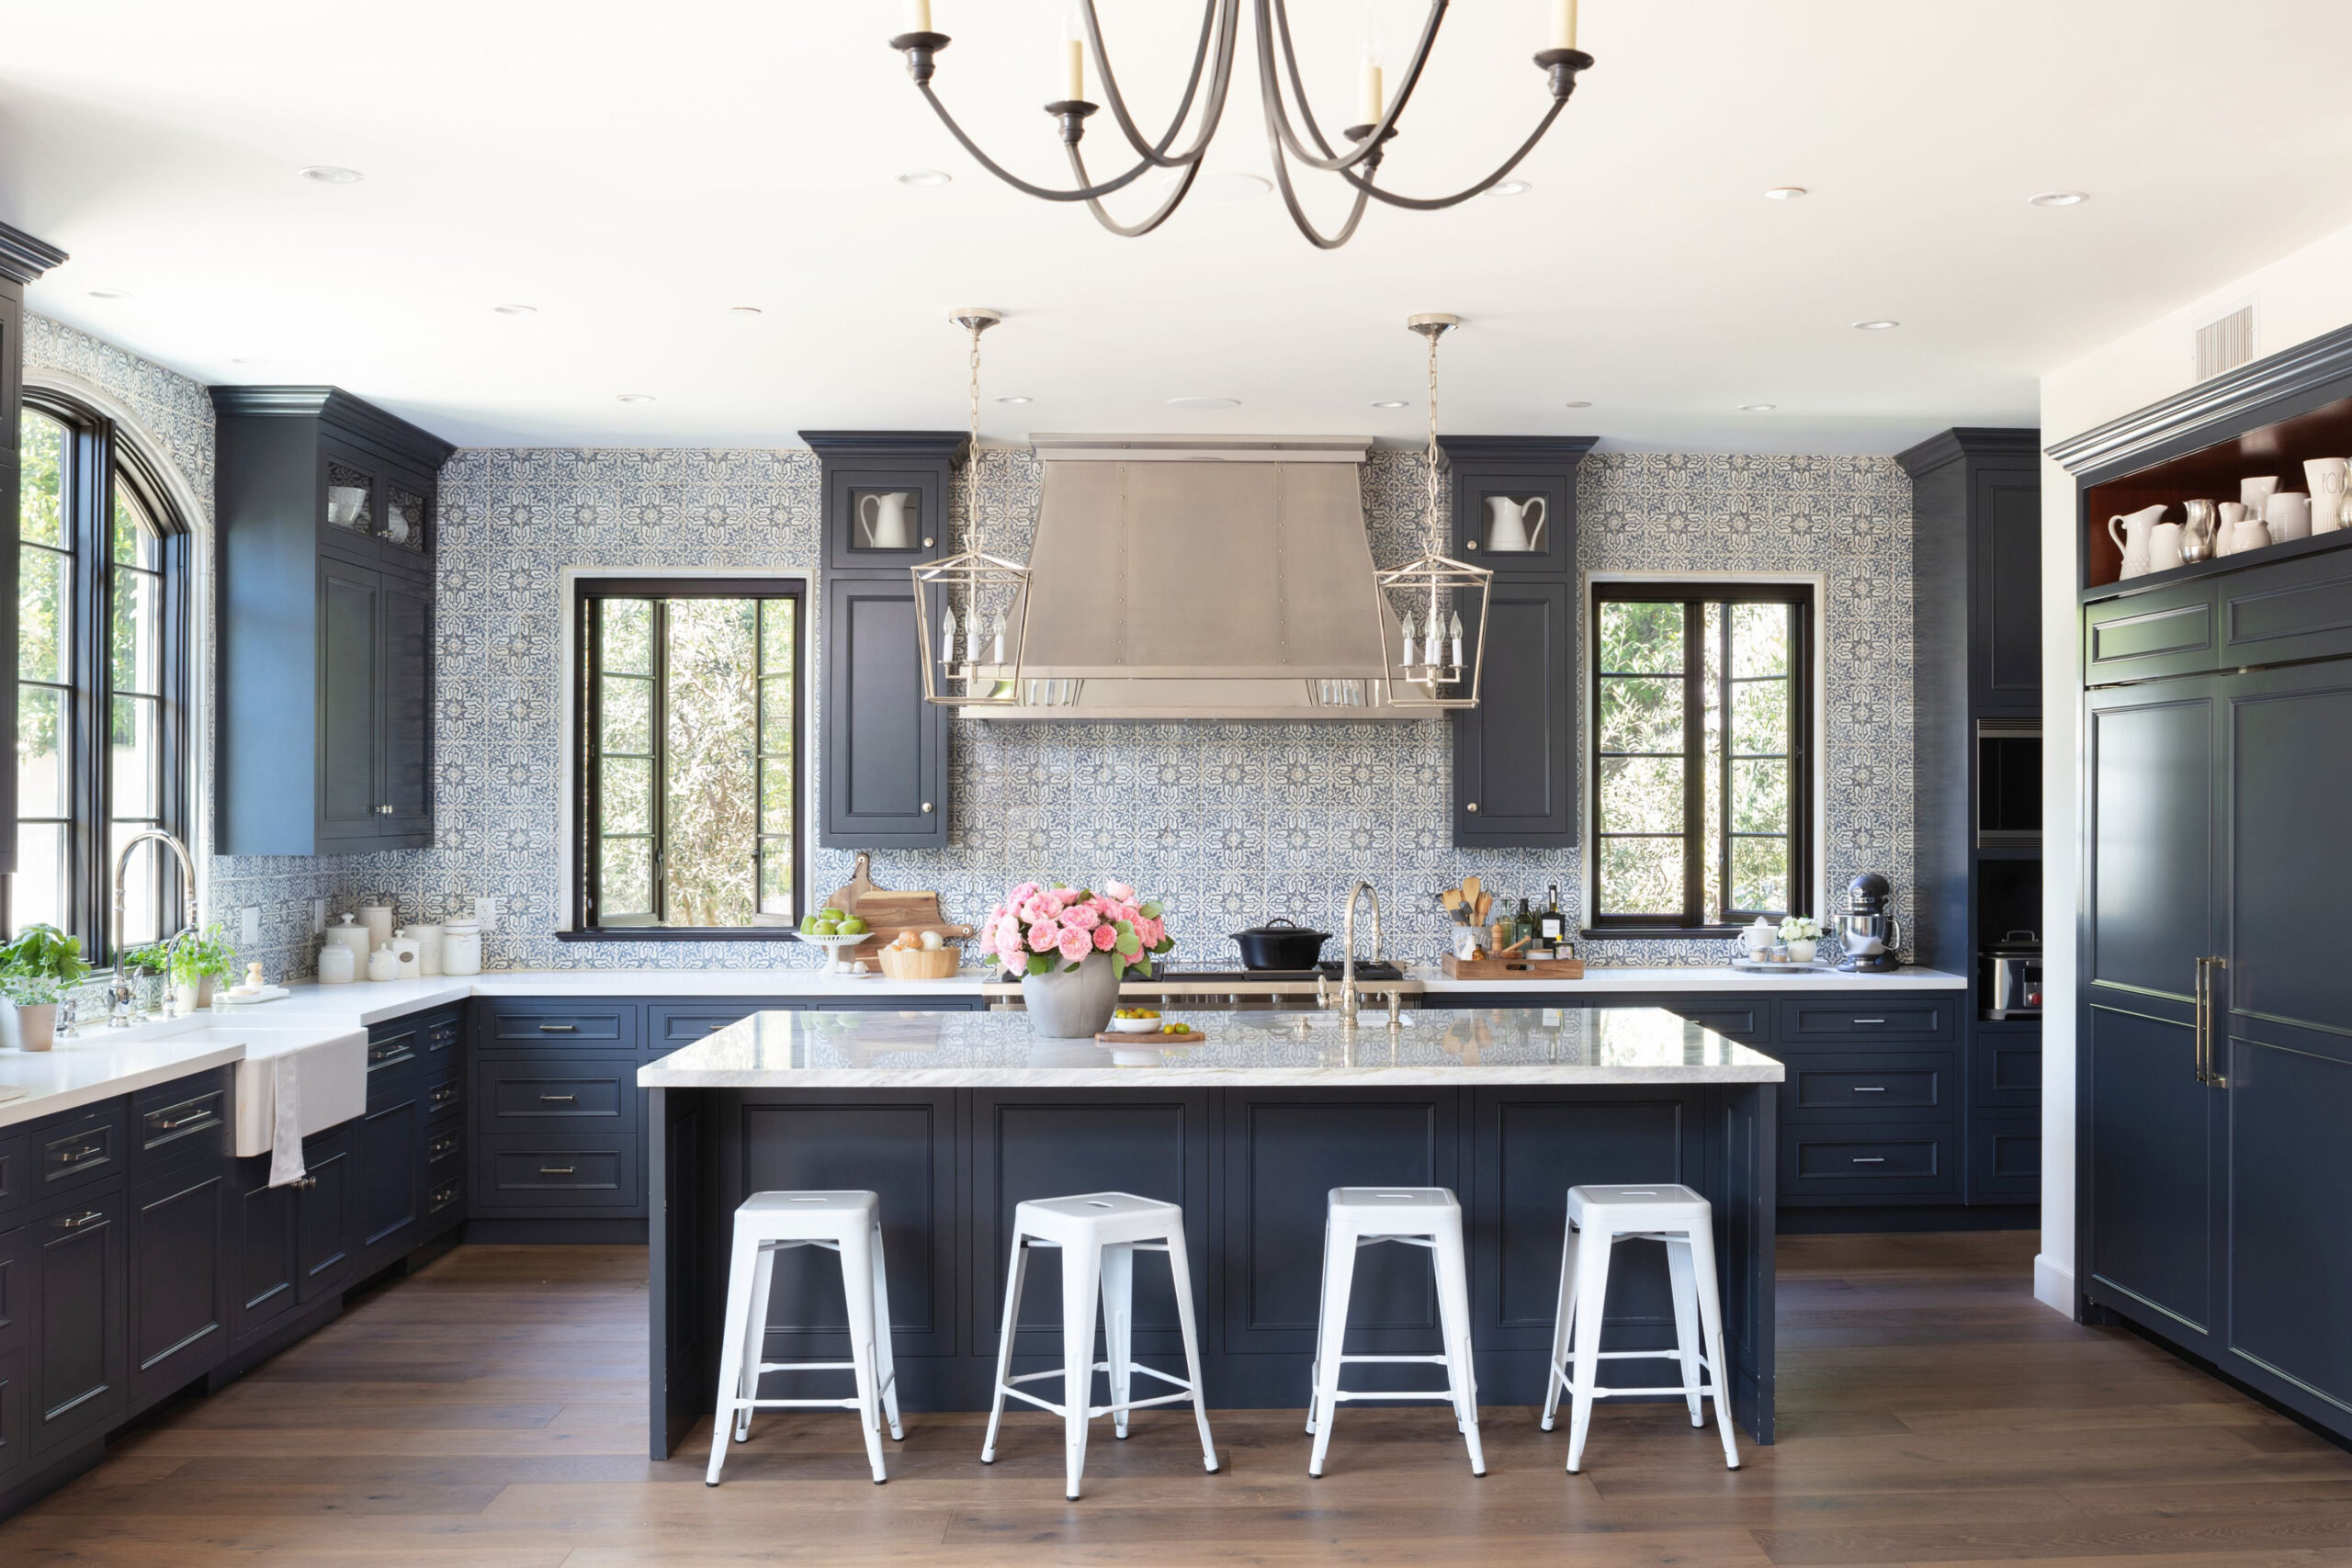 Traditional Kitchen Ideas That Stand the Test of Time